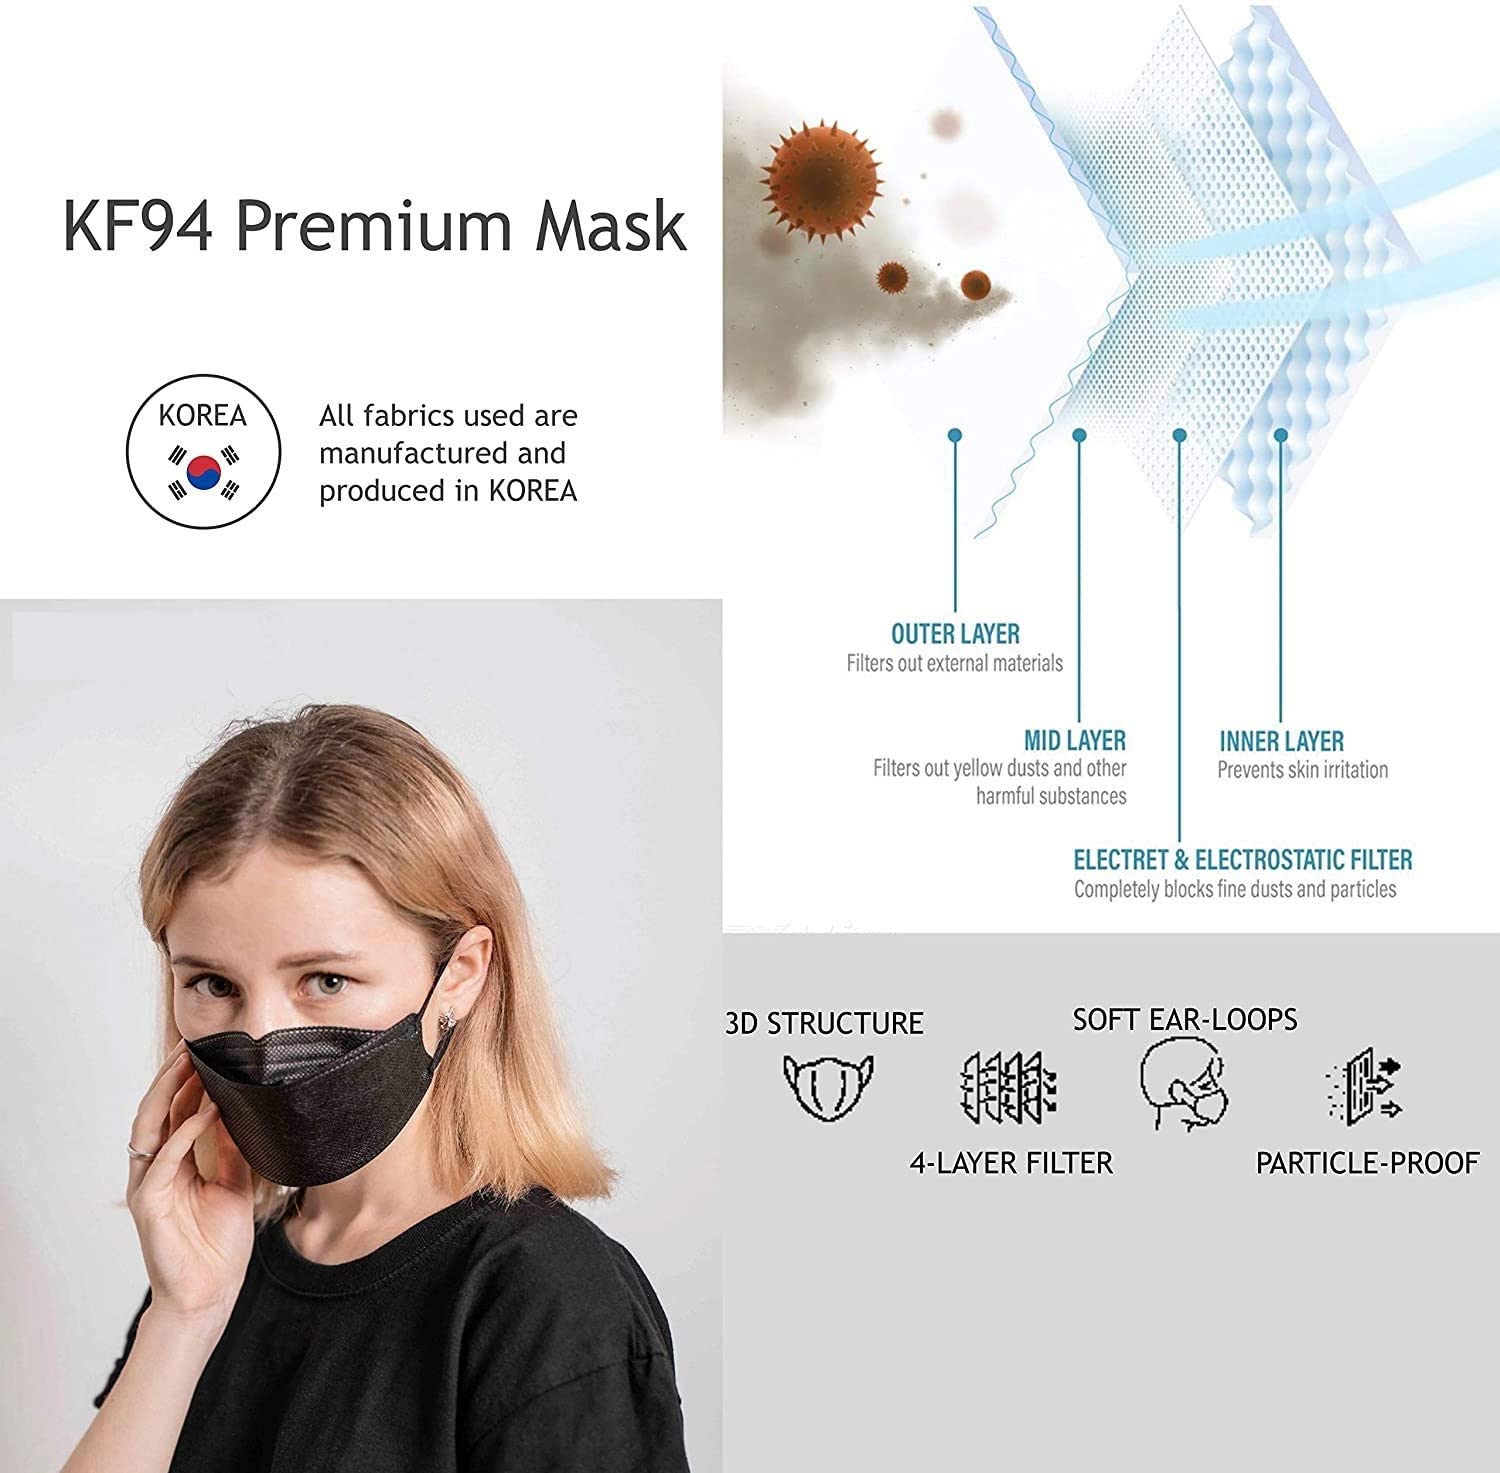 Good Manner Mask KF94, 2D [LARGE] White Adult (10 Masks Total) / The Authorized Distributor in Canada. | Clear Pro Global_Good Manner